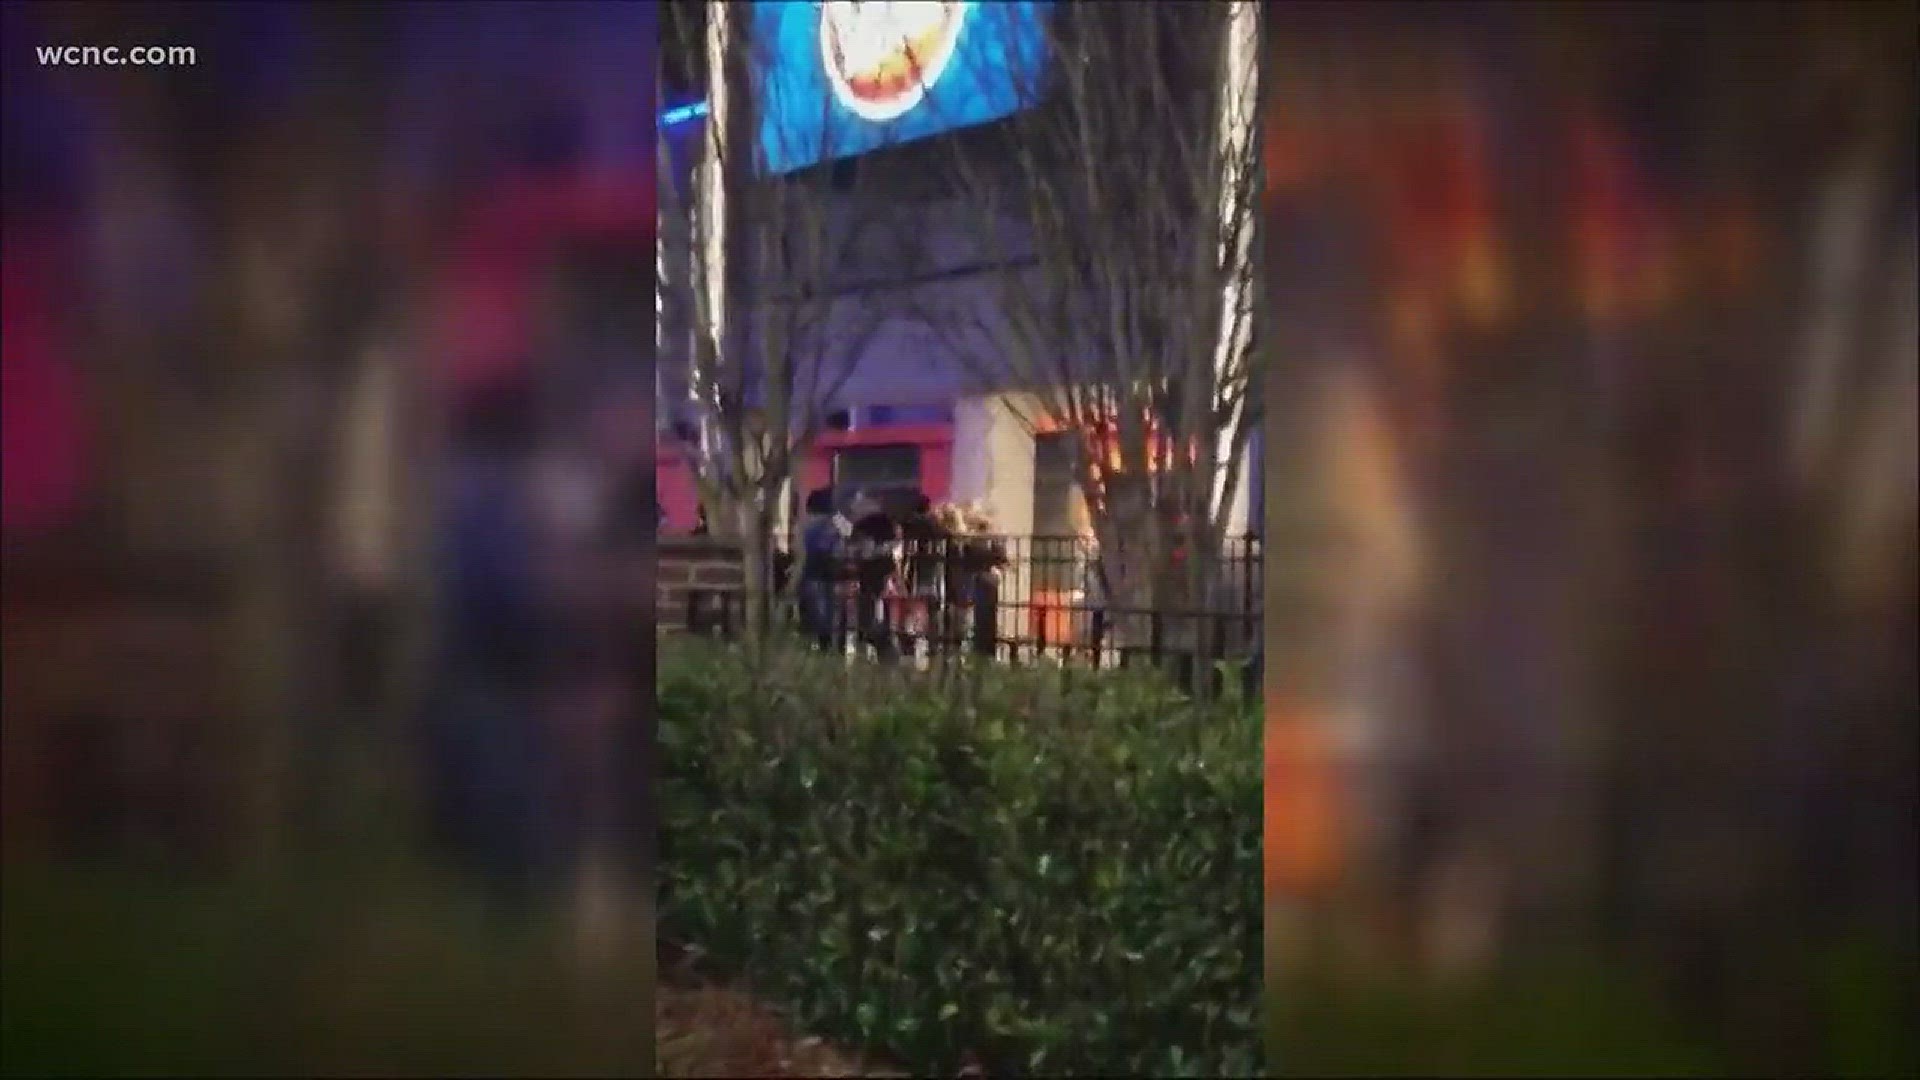 A chaotic scene erupted at the Concord Mills location of Dave and Buster's Saturday night.